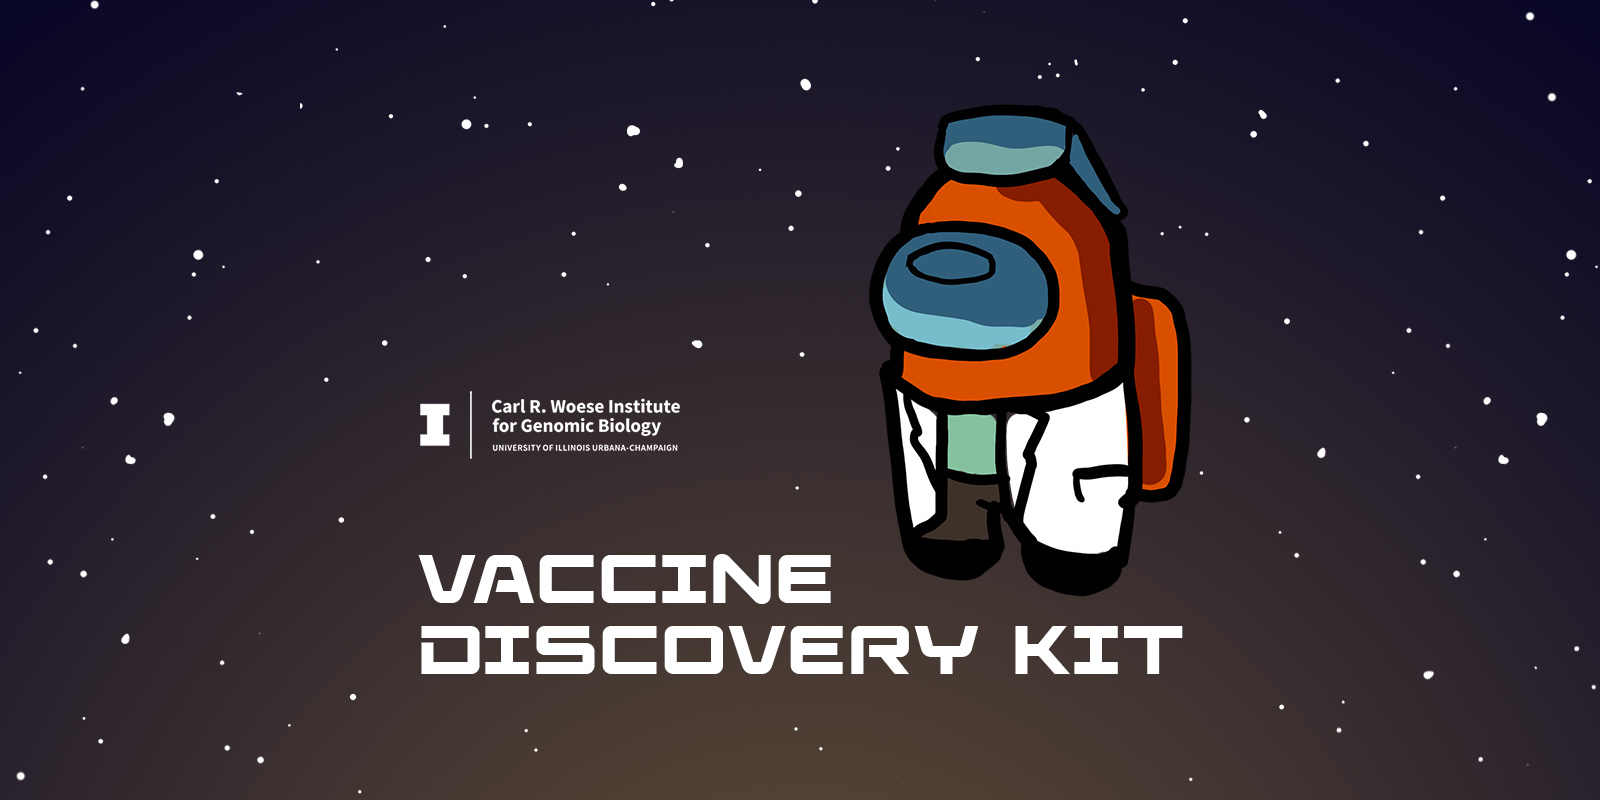 The Carl R. Woese Institute for Genomic Biology is providing vaccine discovery activity kits